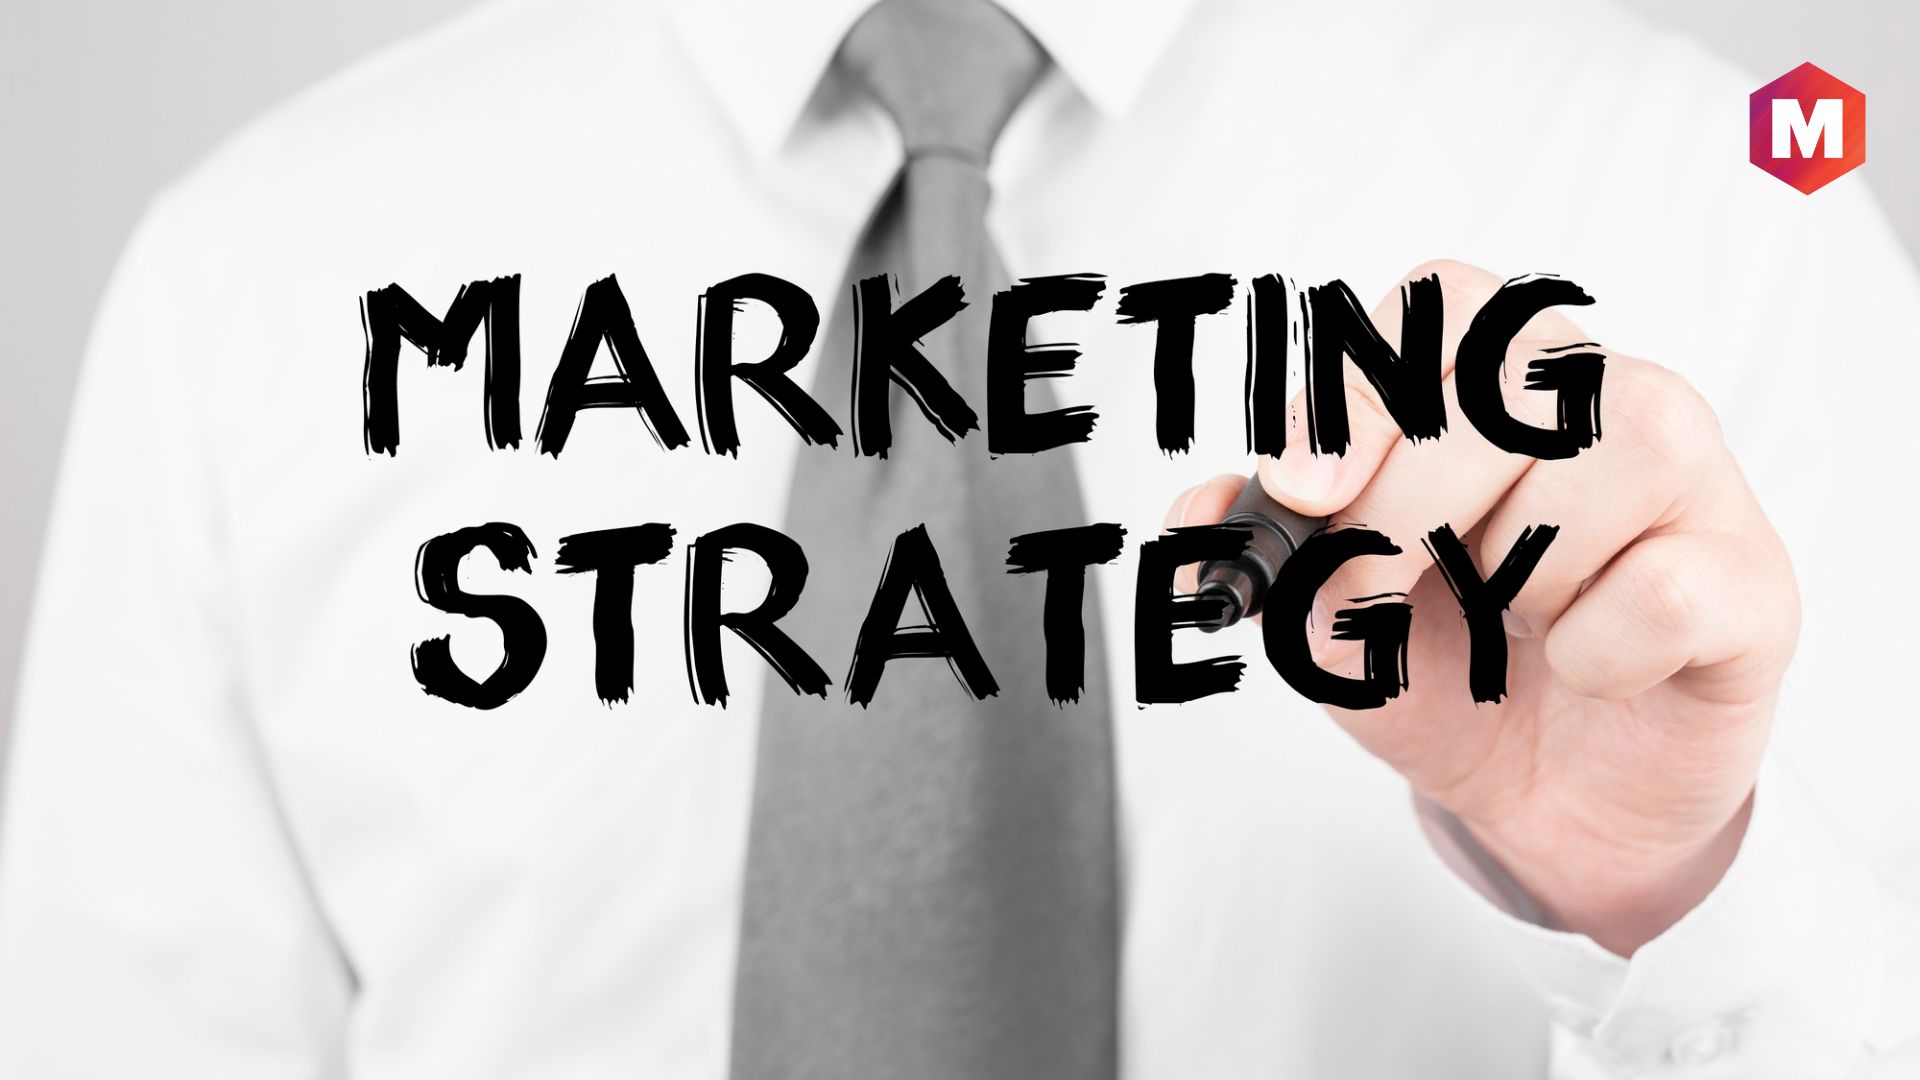 Definition of Marketing Strategy